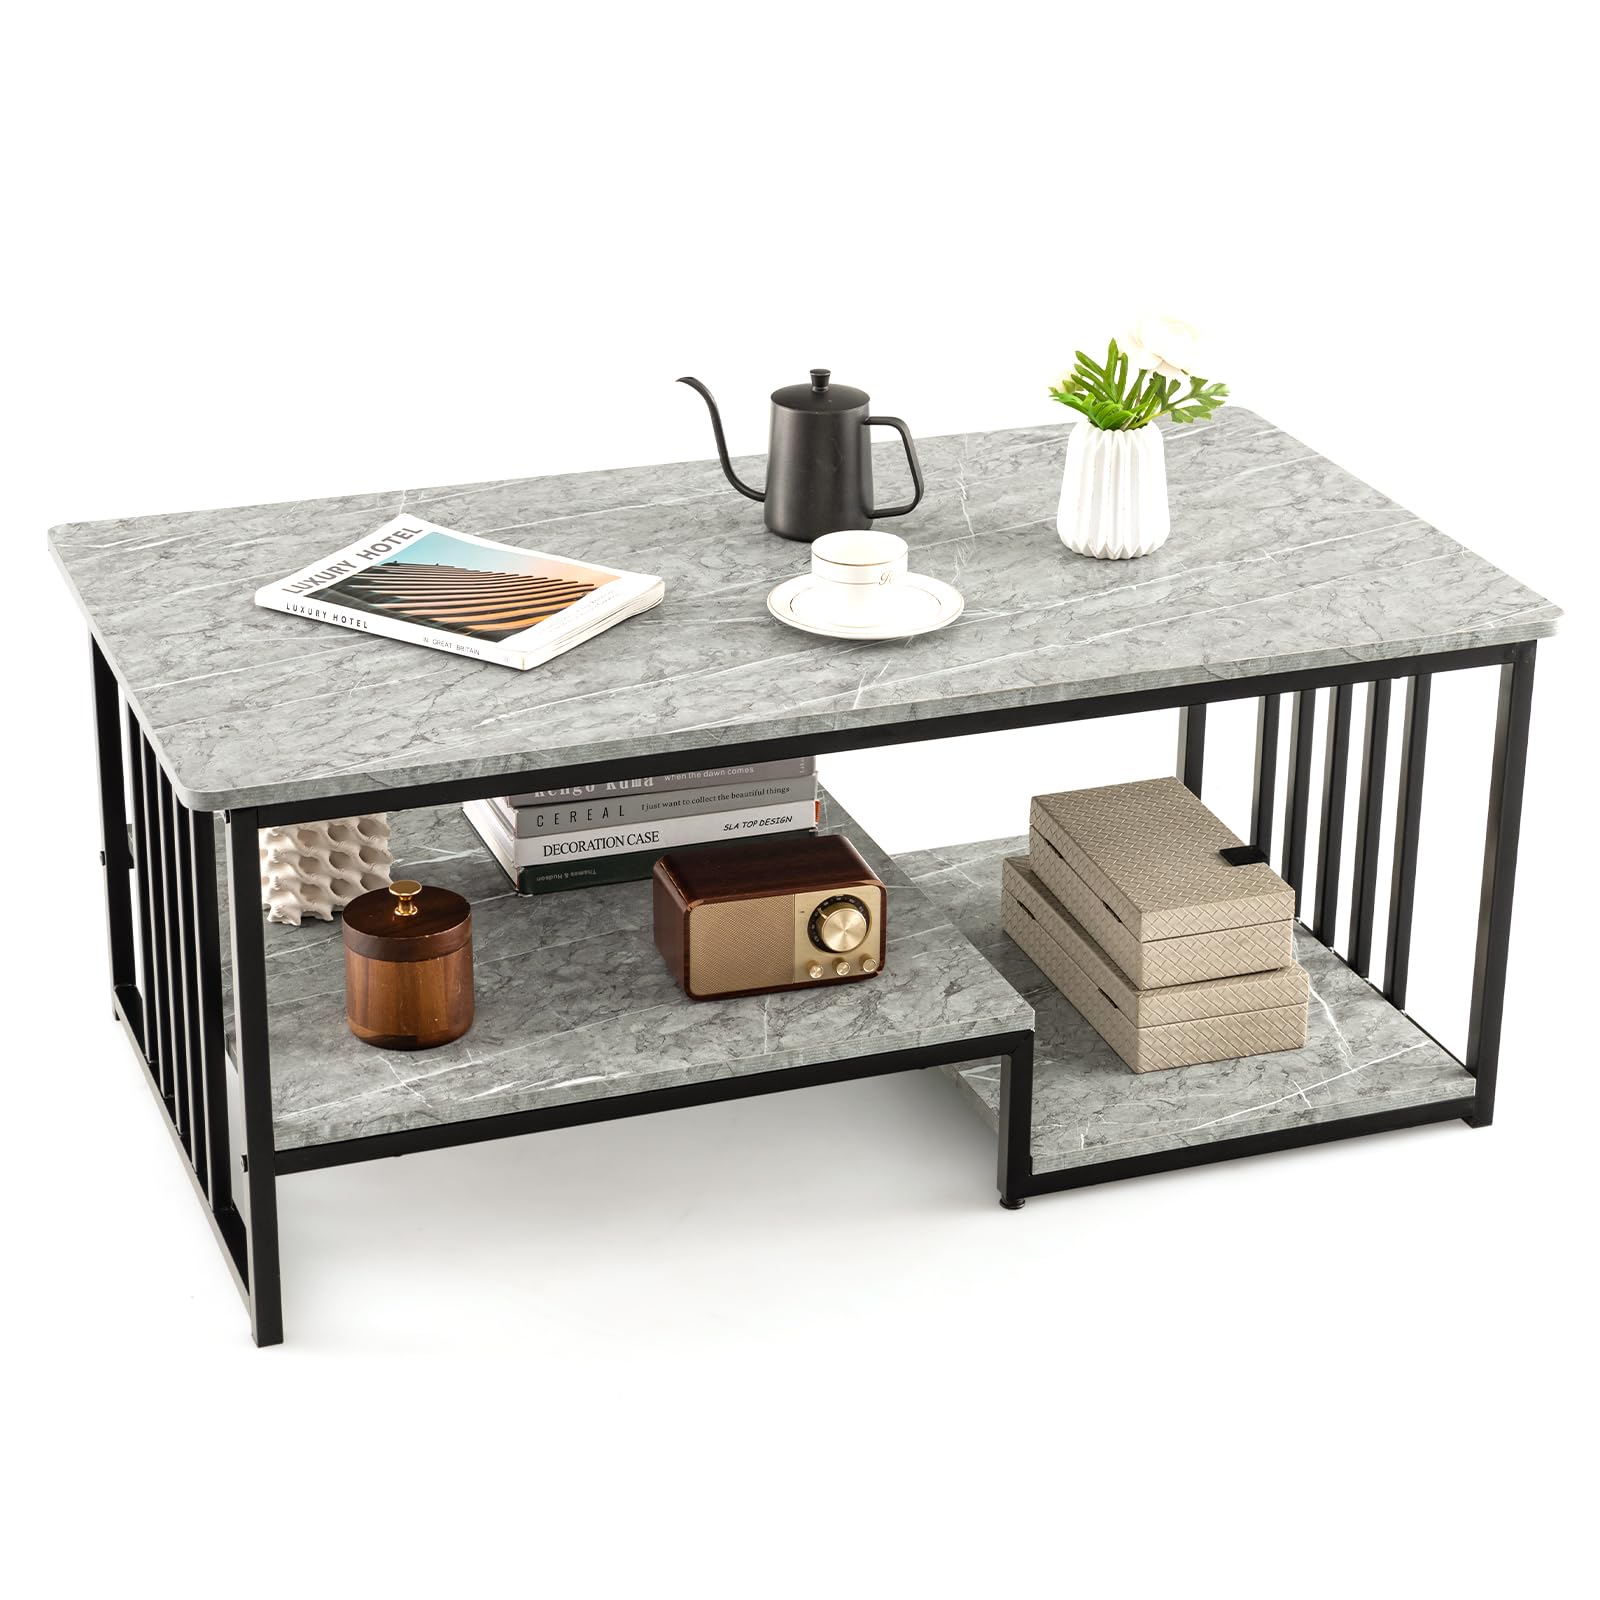 Giantex Faux Marble Coffee Table - Rectangular 2-Tier Center Table with Open Storage Shelf